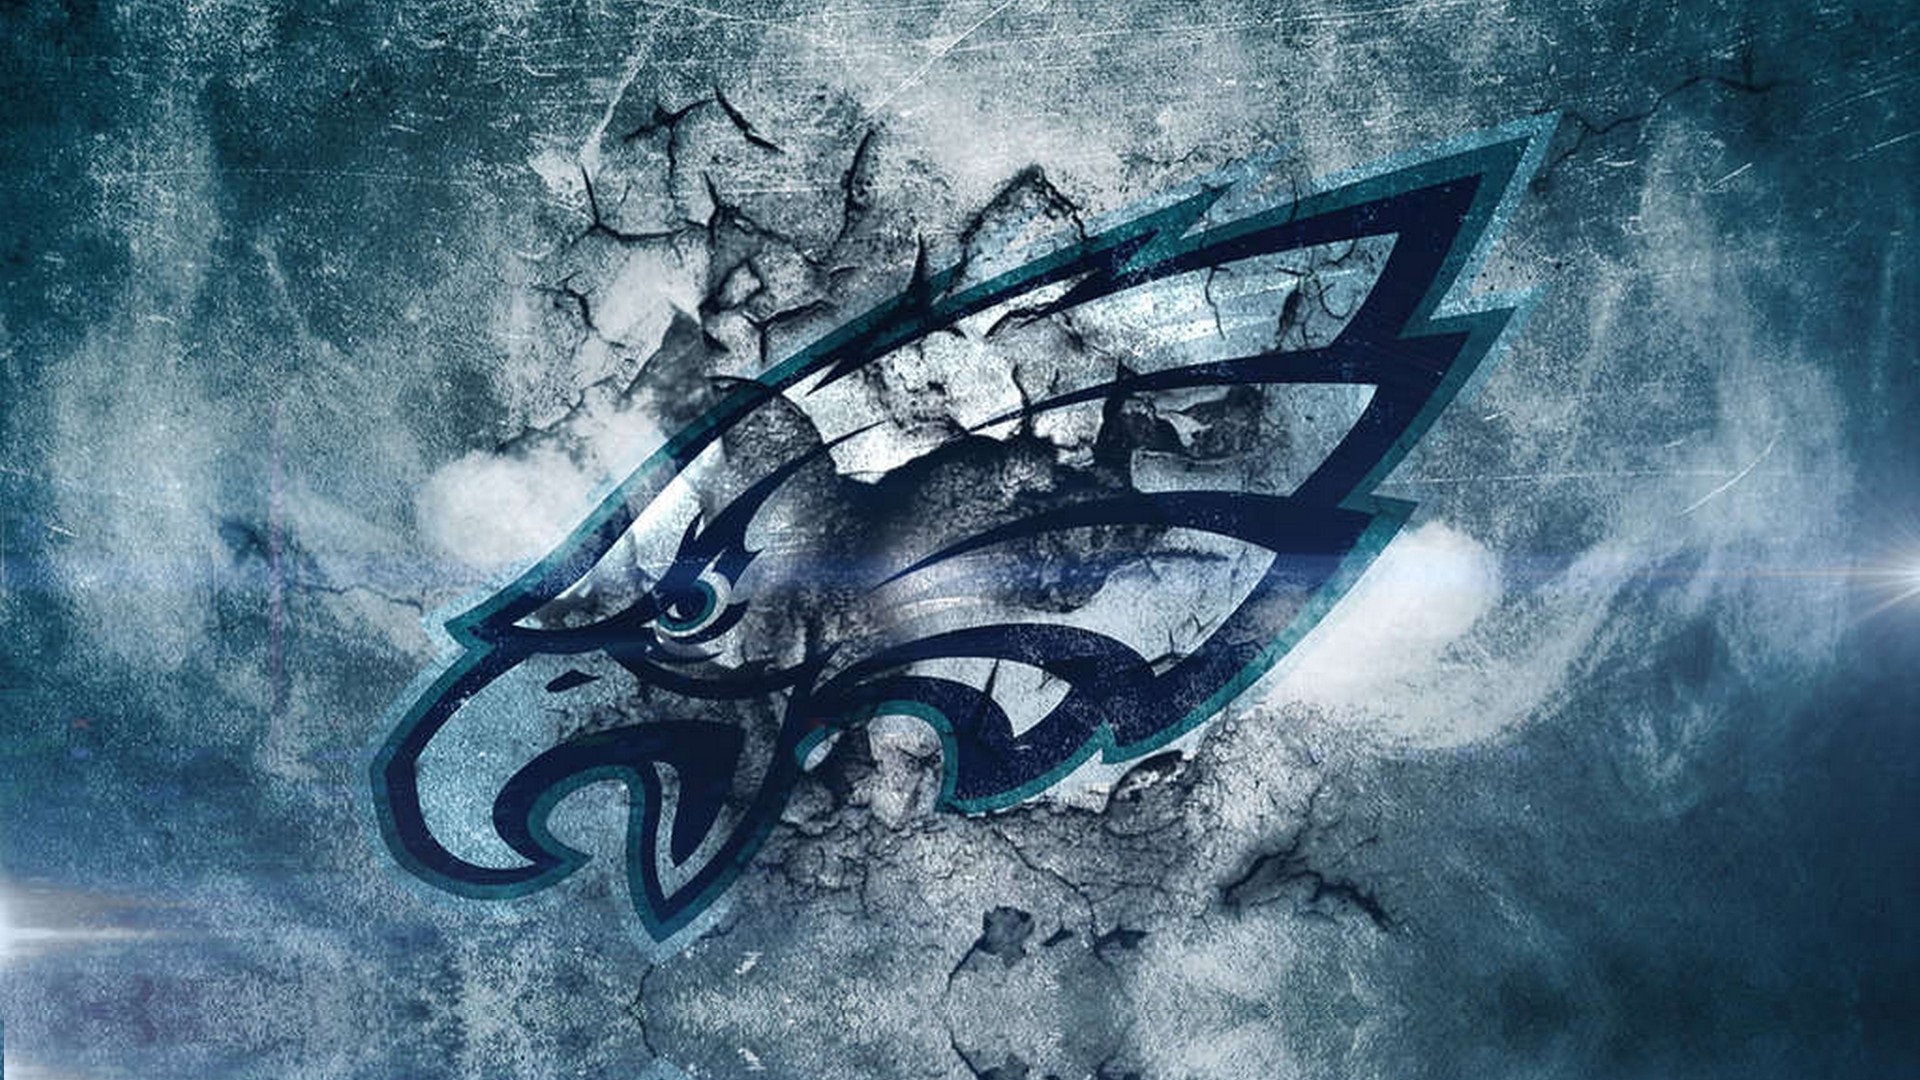 Wallpapers Philadelphia Eagles with resolution 1920x1080 pixel. You can make this wallpaper for your Mac or Windows Desktop Background, iPhone, Android or Tablet and another Smartphone device